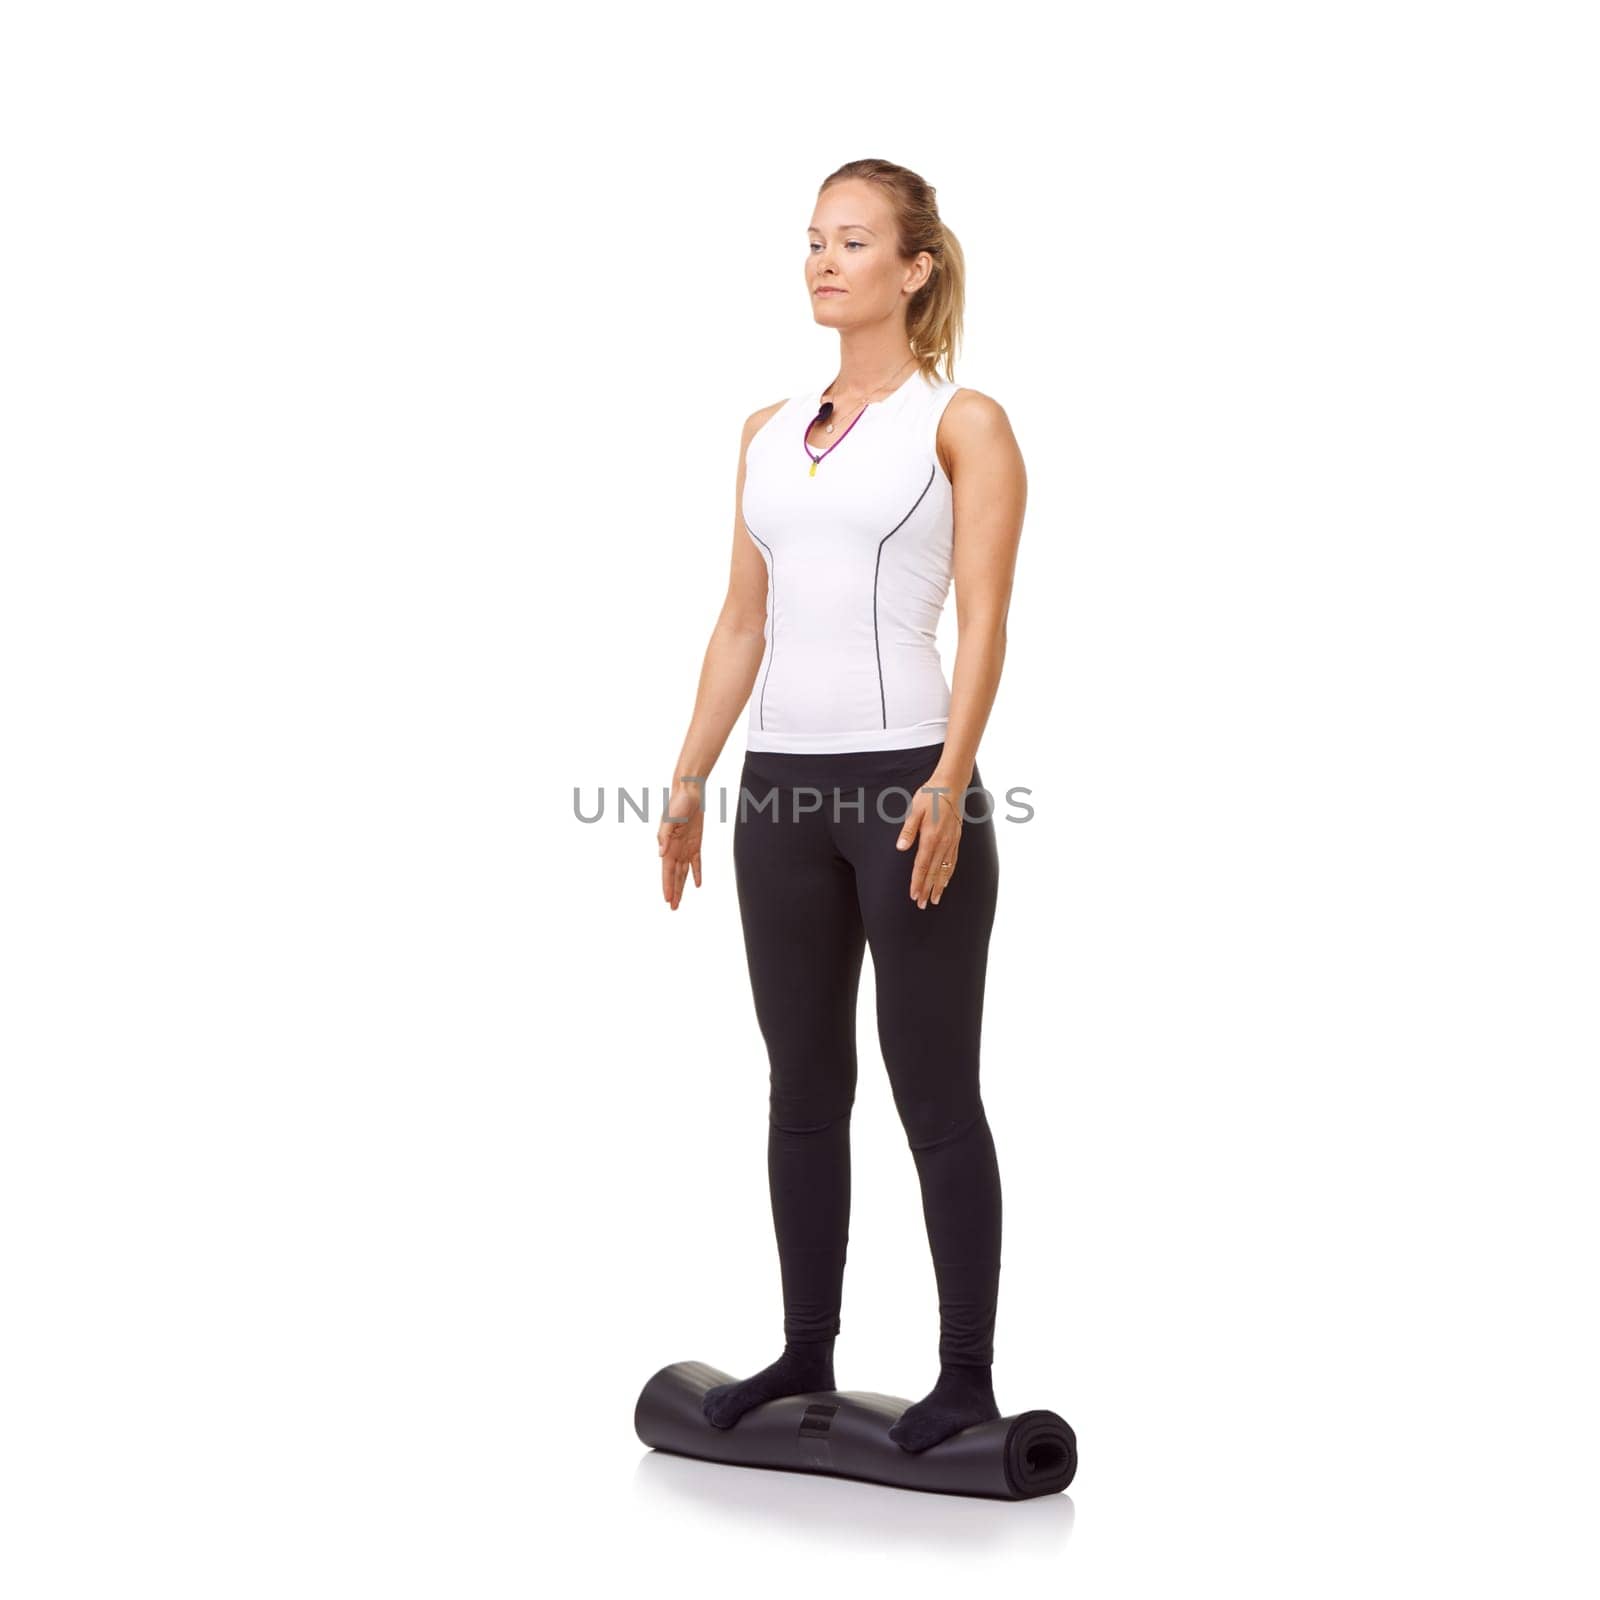 Woman, exercise and mat in studio for fitness, pilates or workout for healthy body, wellness or balance. Person, face and yoga in sportswear for physical activity on mock up space or white background.